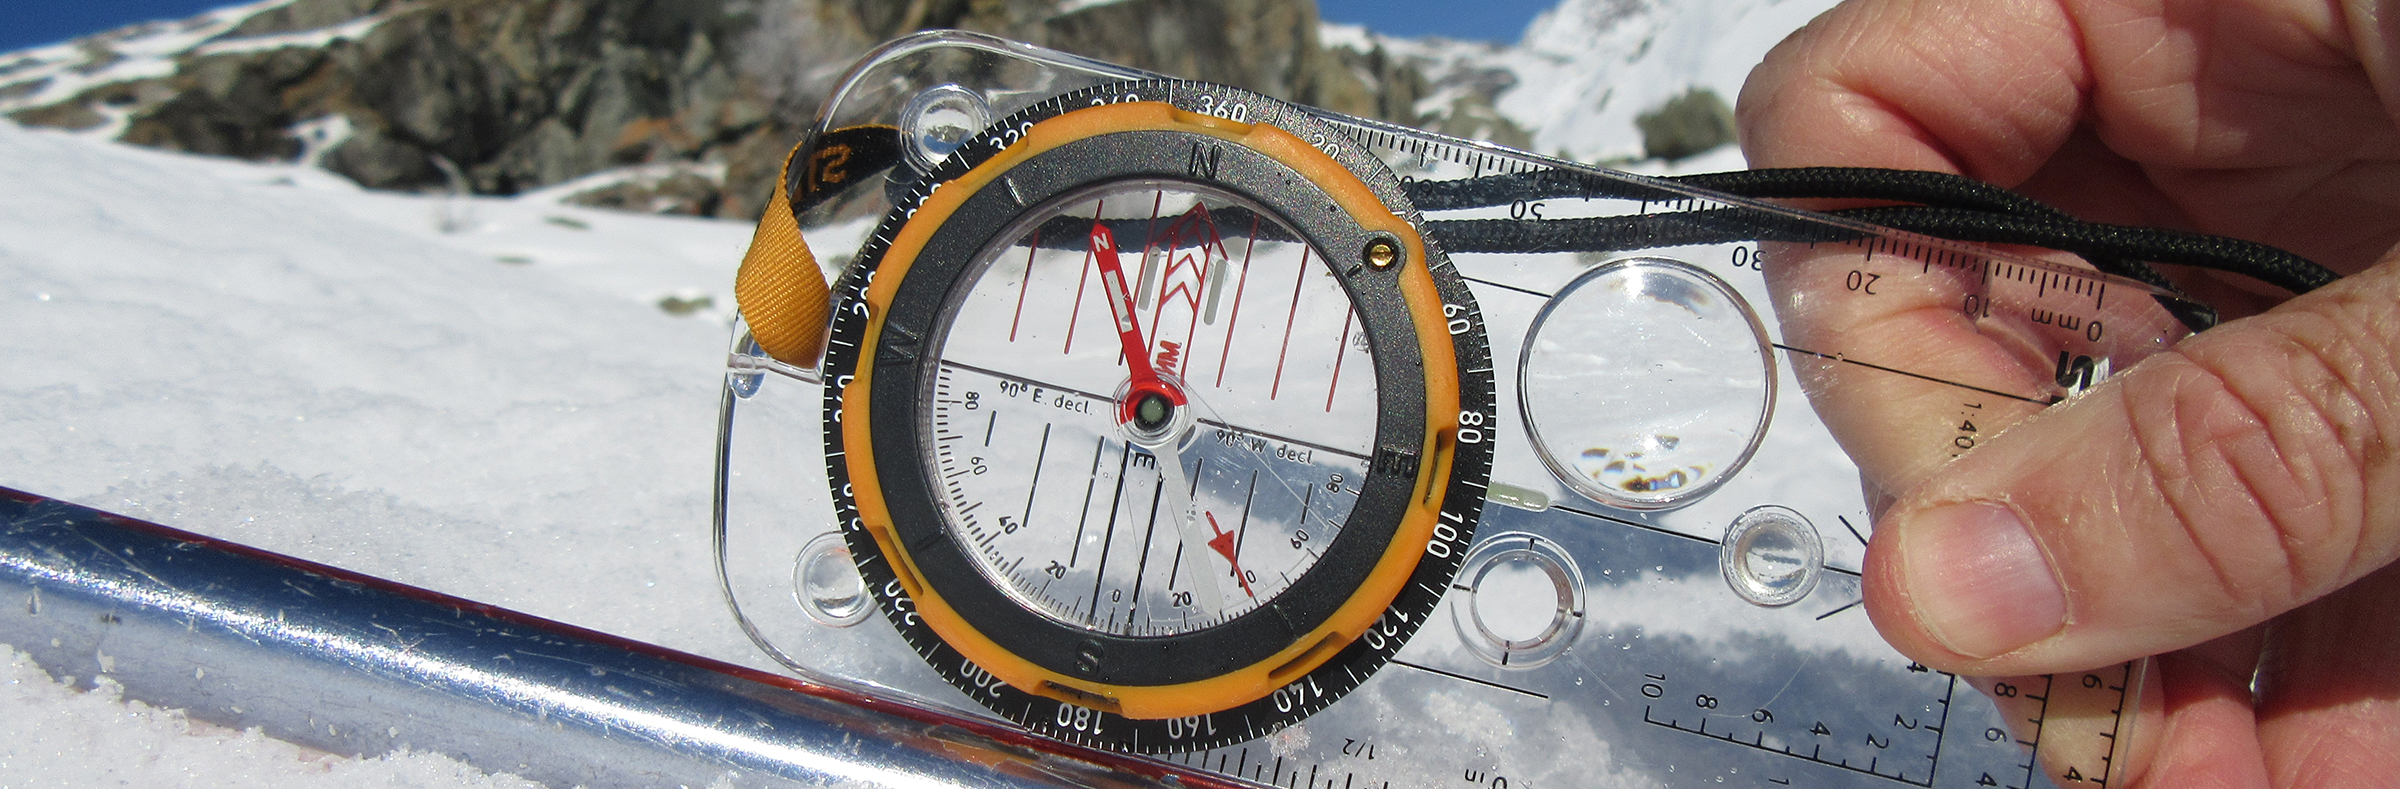 TH Using a built in clinometer a trekking pole helps provide a straight edge on which to measure the slope angle